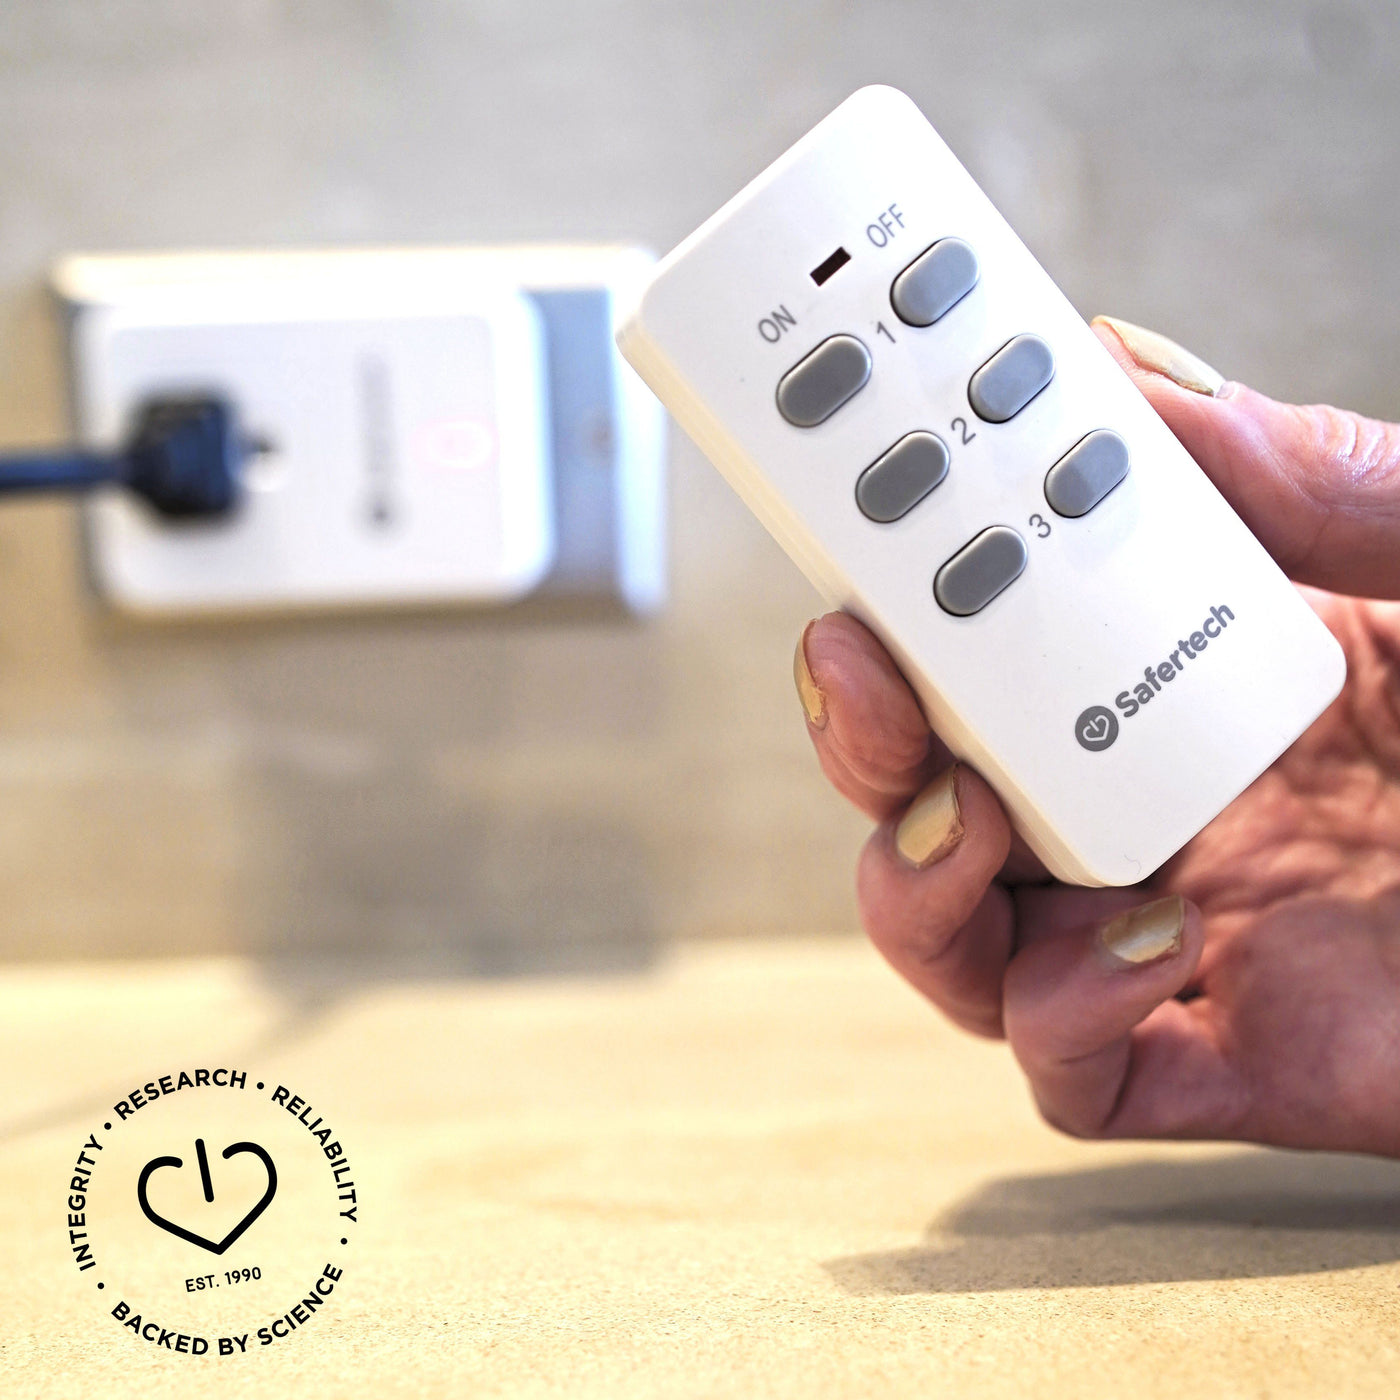 UNPLUG! Turn Off WiFi With Our Easy WiFi Kill Switch For Better Sleep and Calmer Days- Unplug! Radiation Tech Wellness 